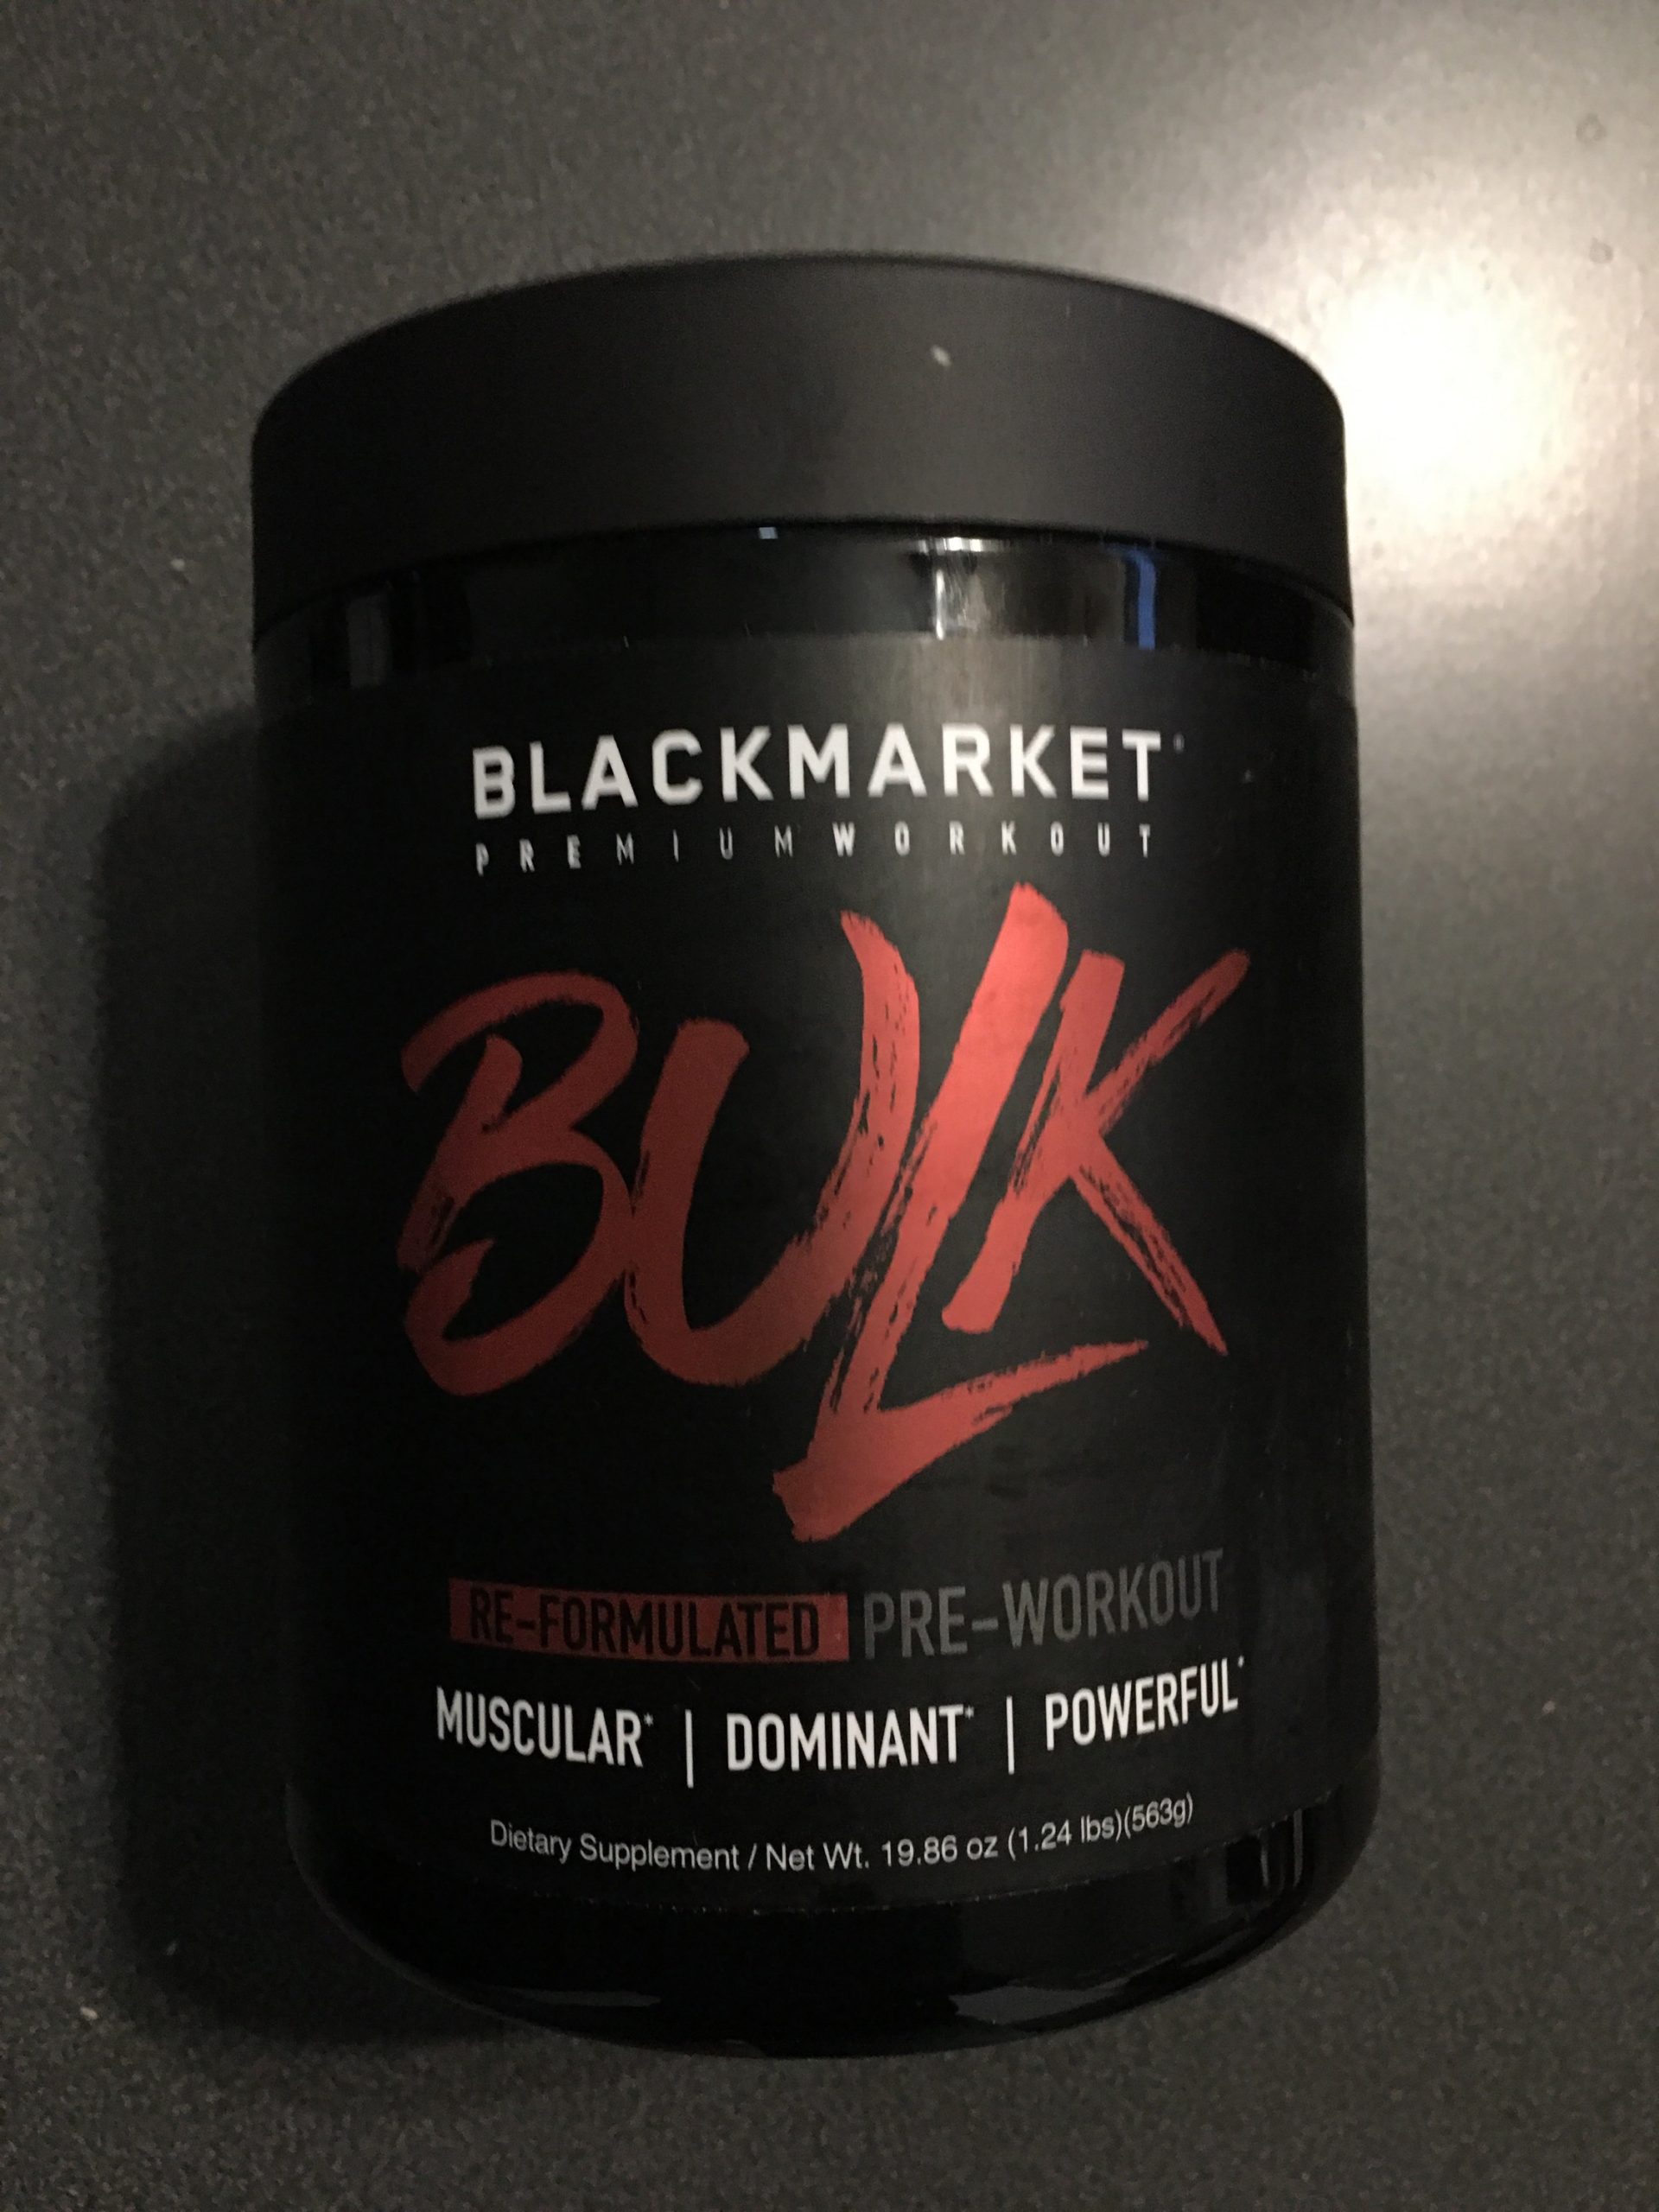 5 Day Black Market Pre Workout Cuts for Weight Loss